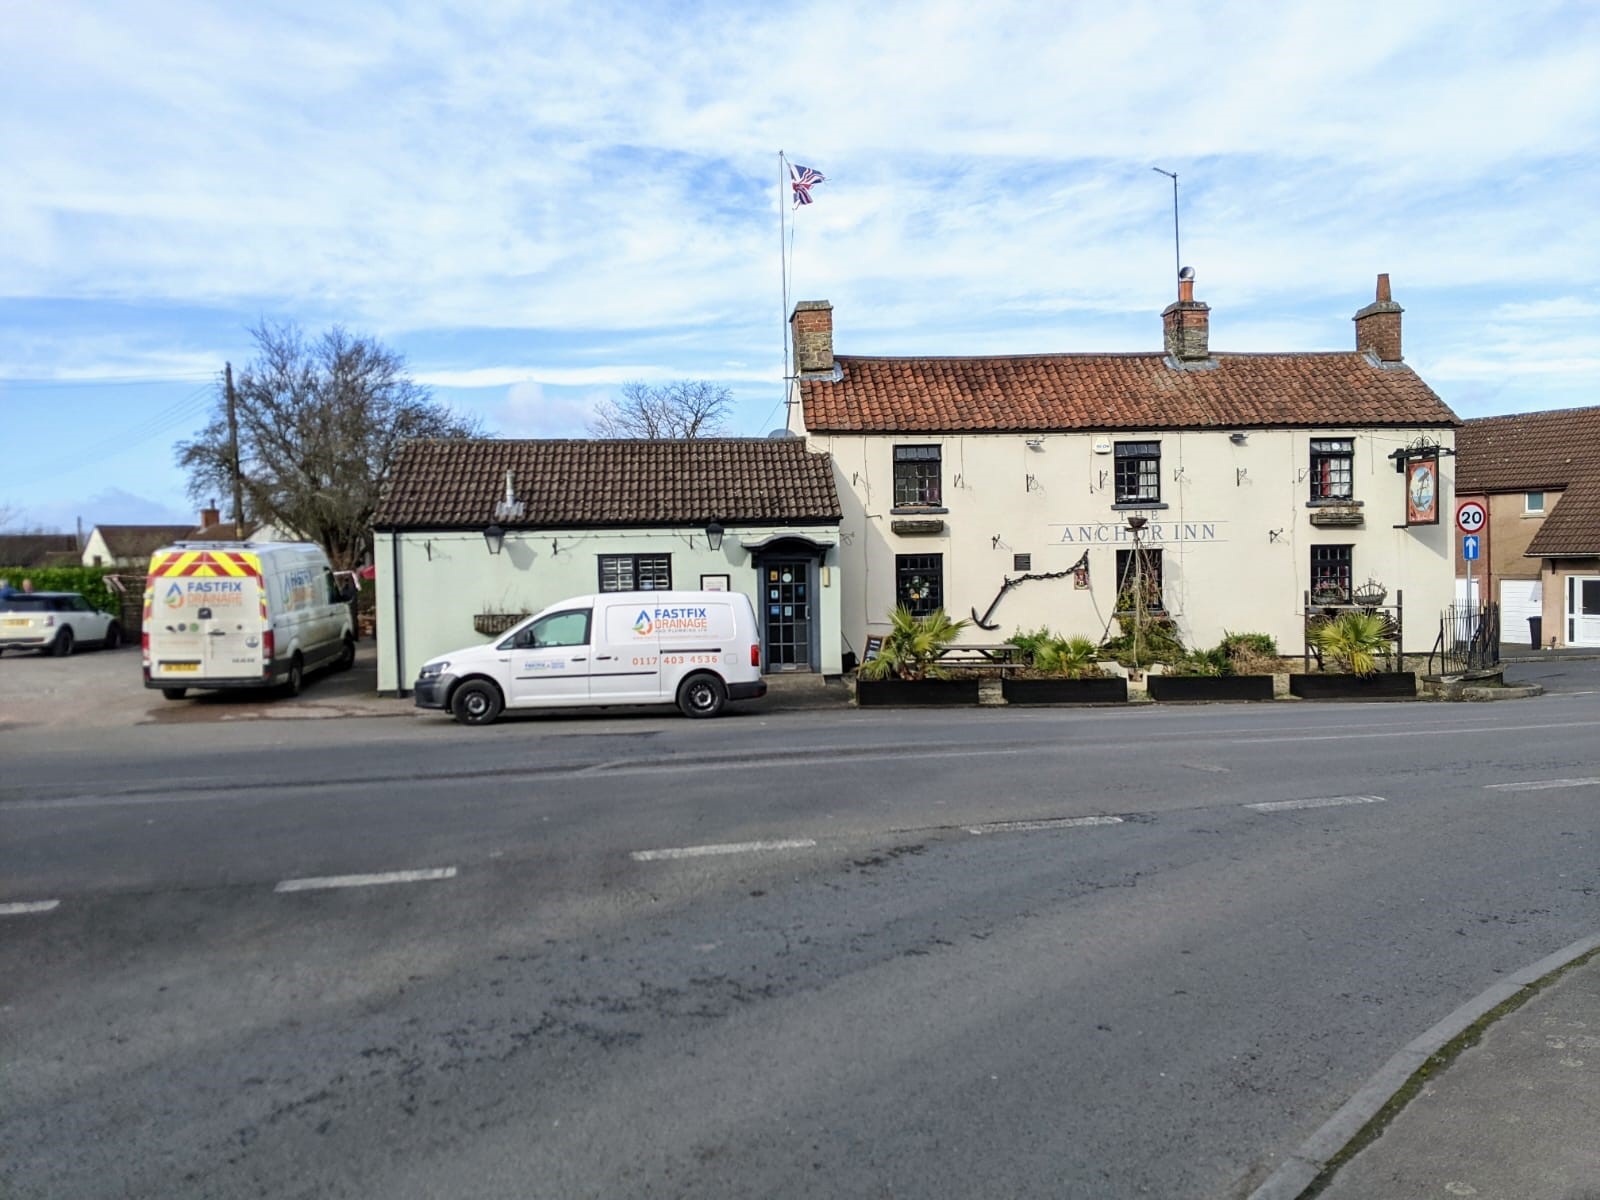 A picture of the Anchor Inn